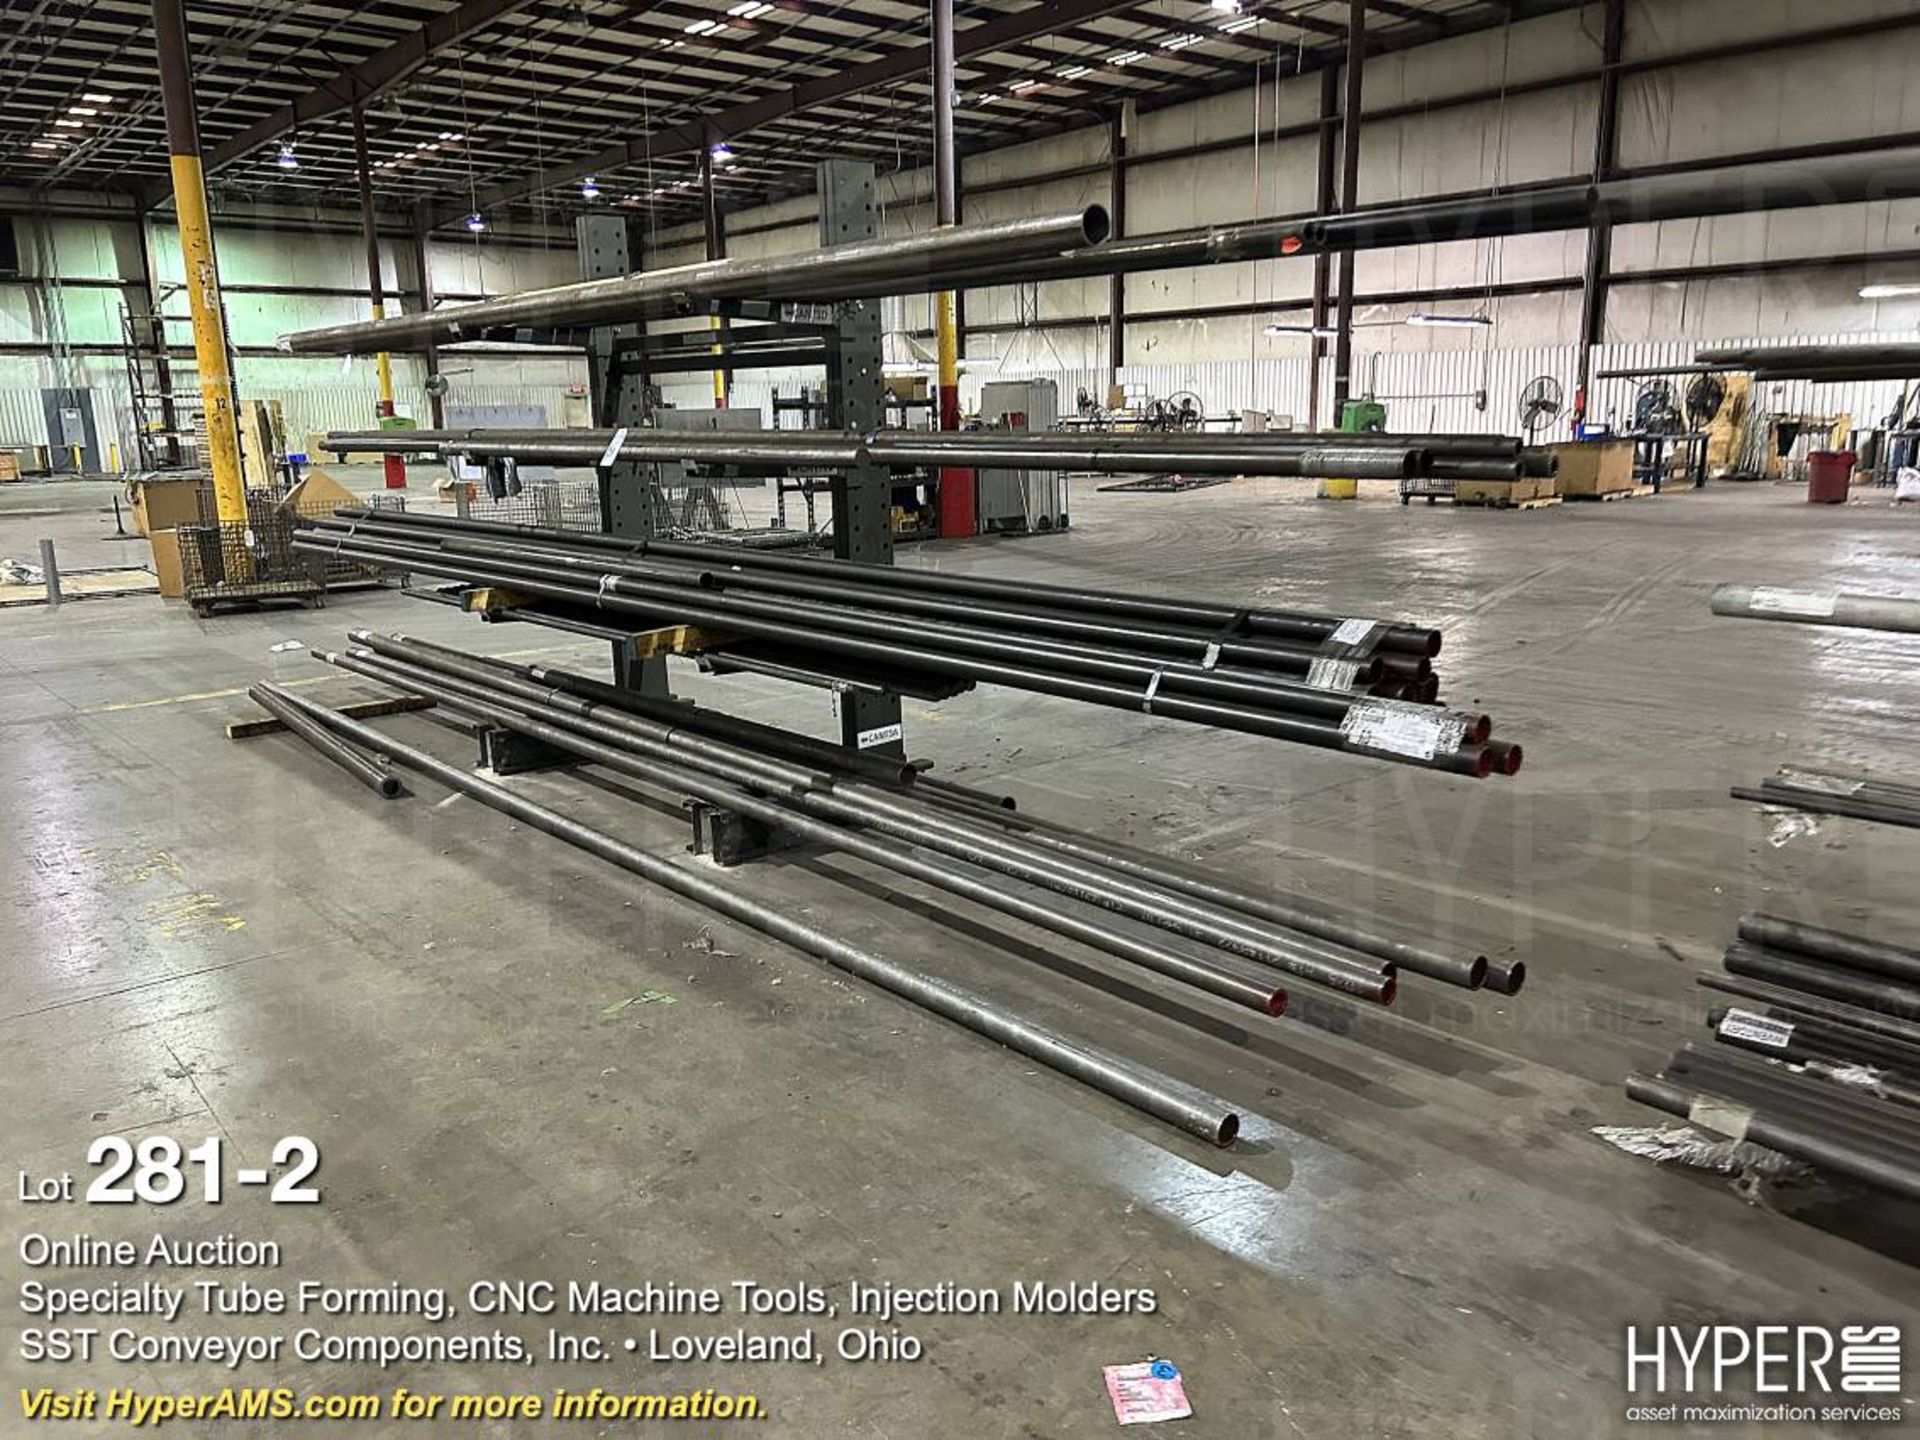 Steel bar stock and tubing stock on cantilever racking - Image 2 of 4